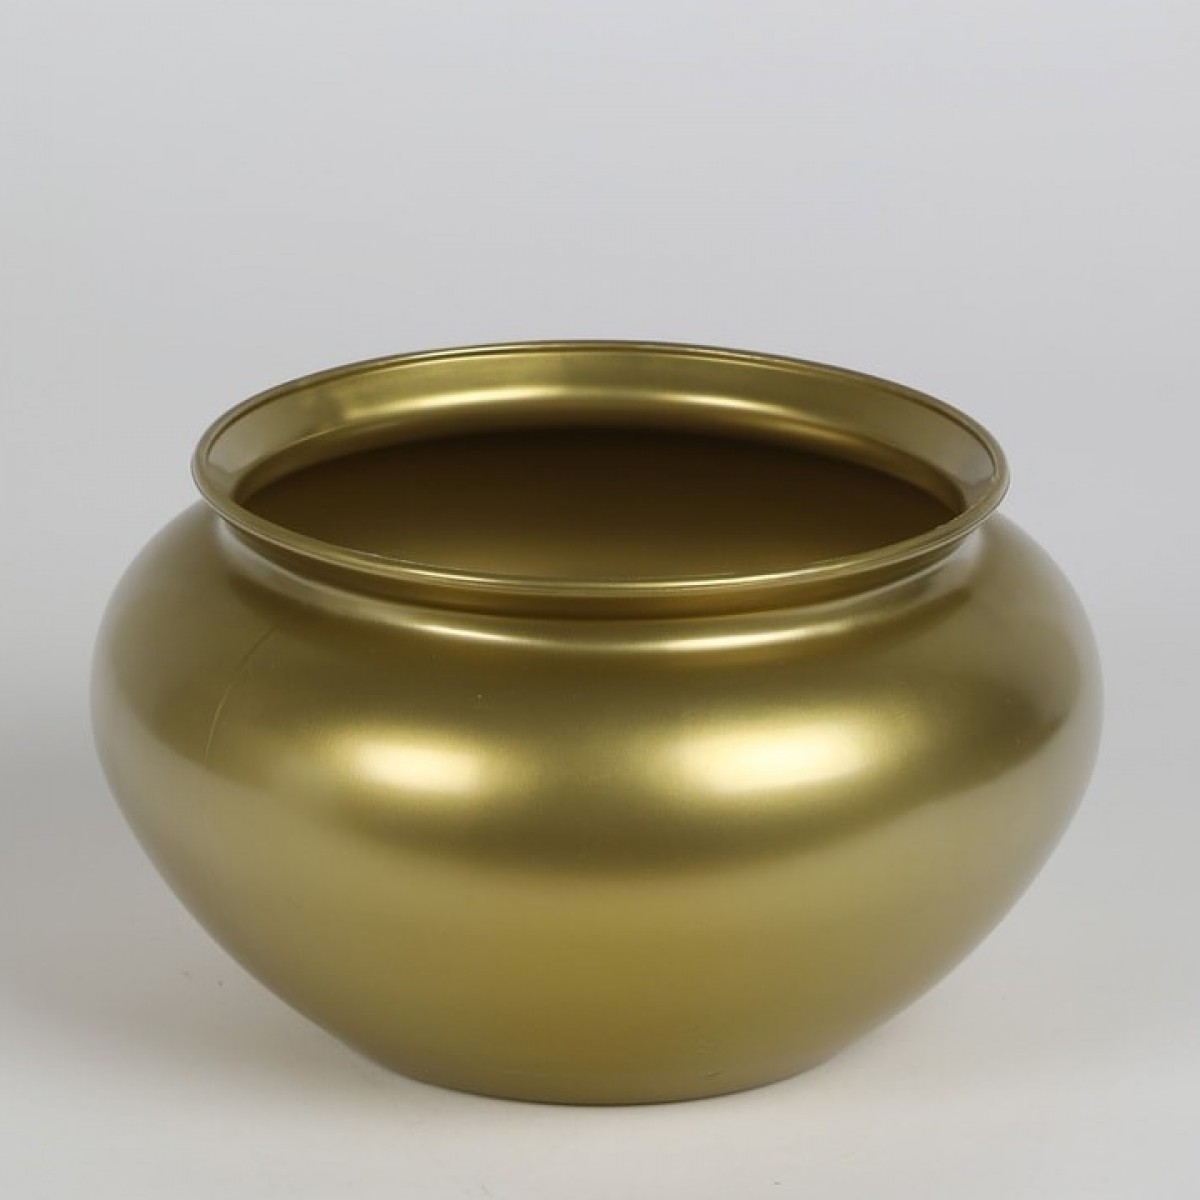 5134 Daily Design Bowl Gold 13x10cm Acrylic Container - 1 No